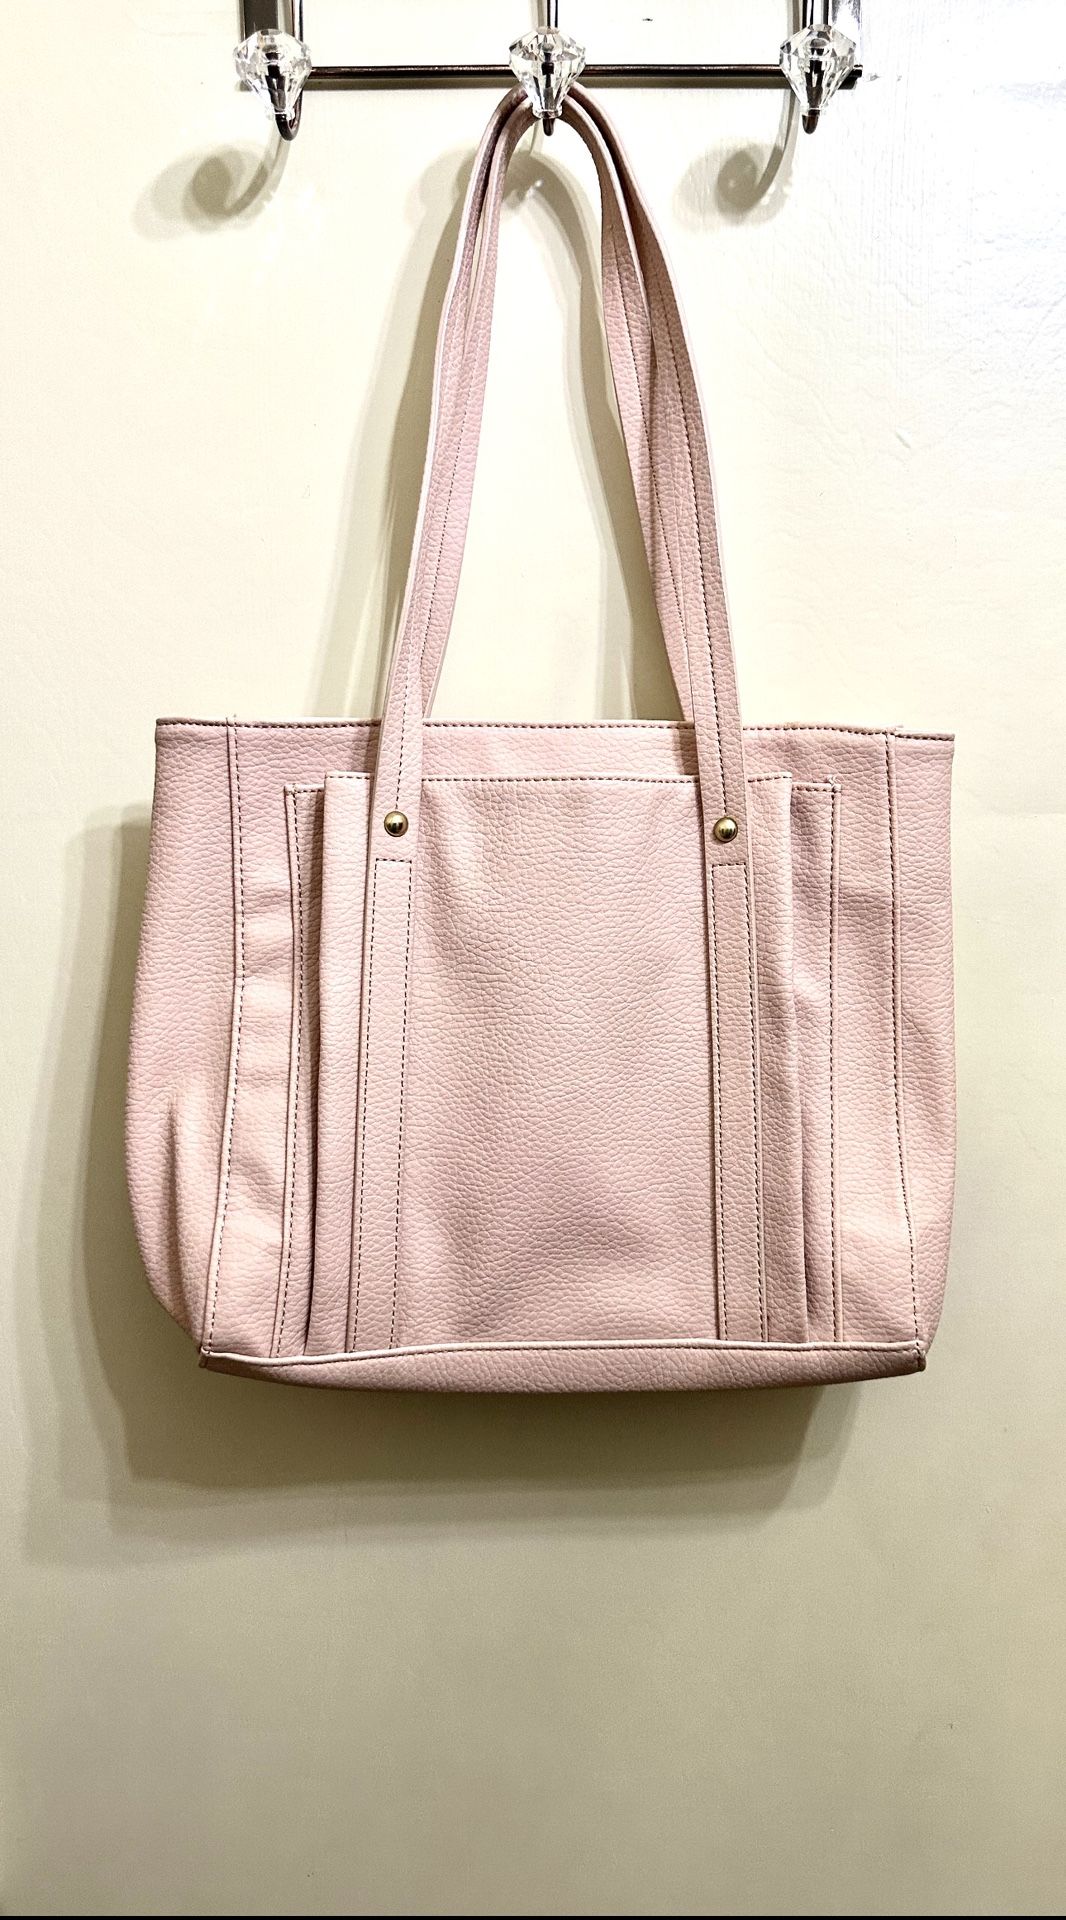 Relic Bailey Doulble Shoulder Bag Blush Pink By Fossil